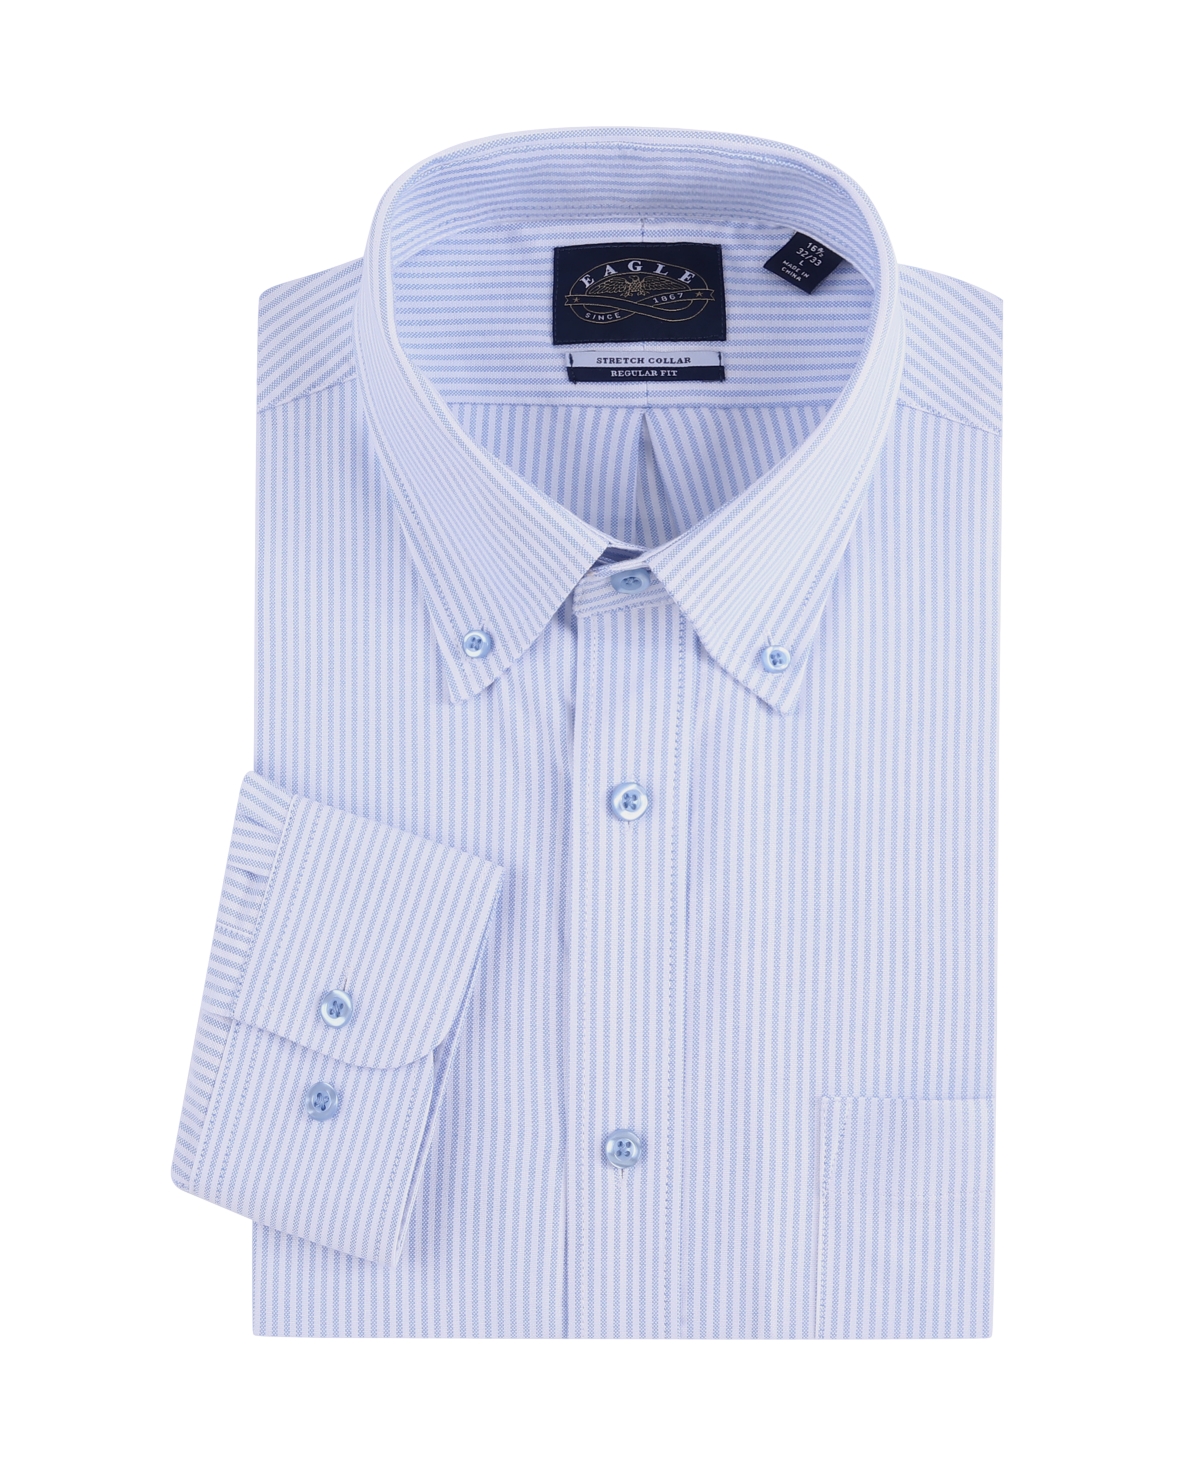 Men's Pin Striped Oxford Shirt with Stretch Collar - Blue